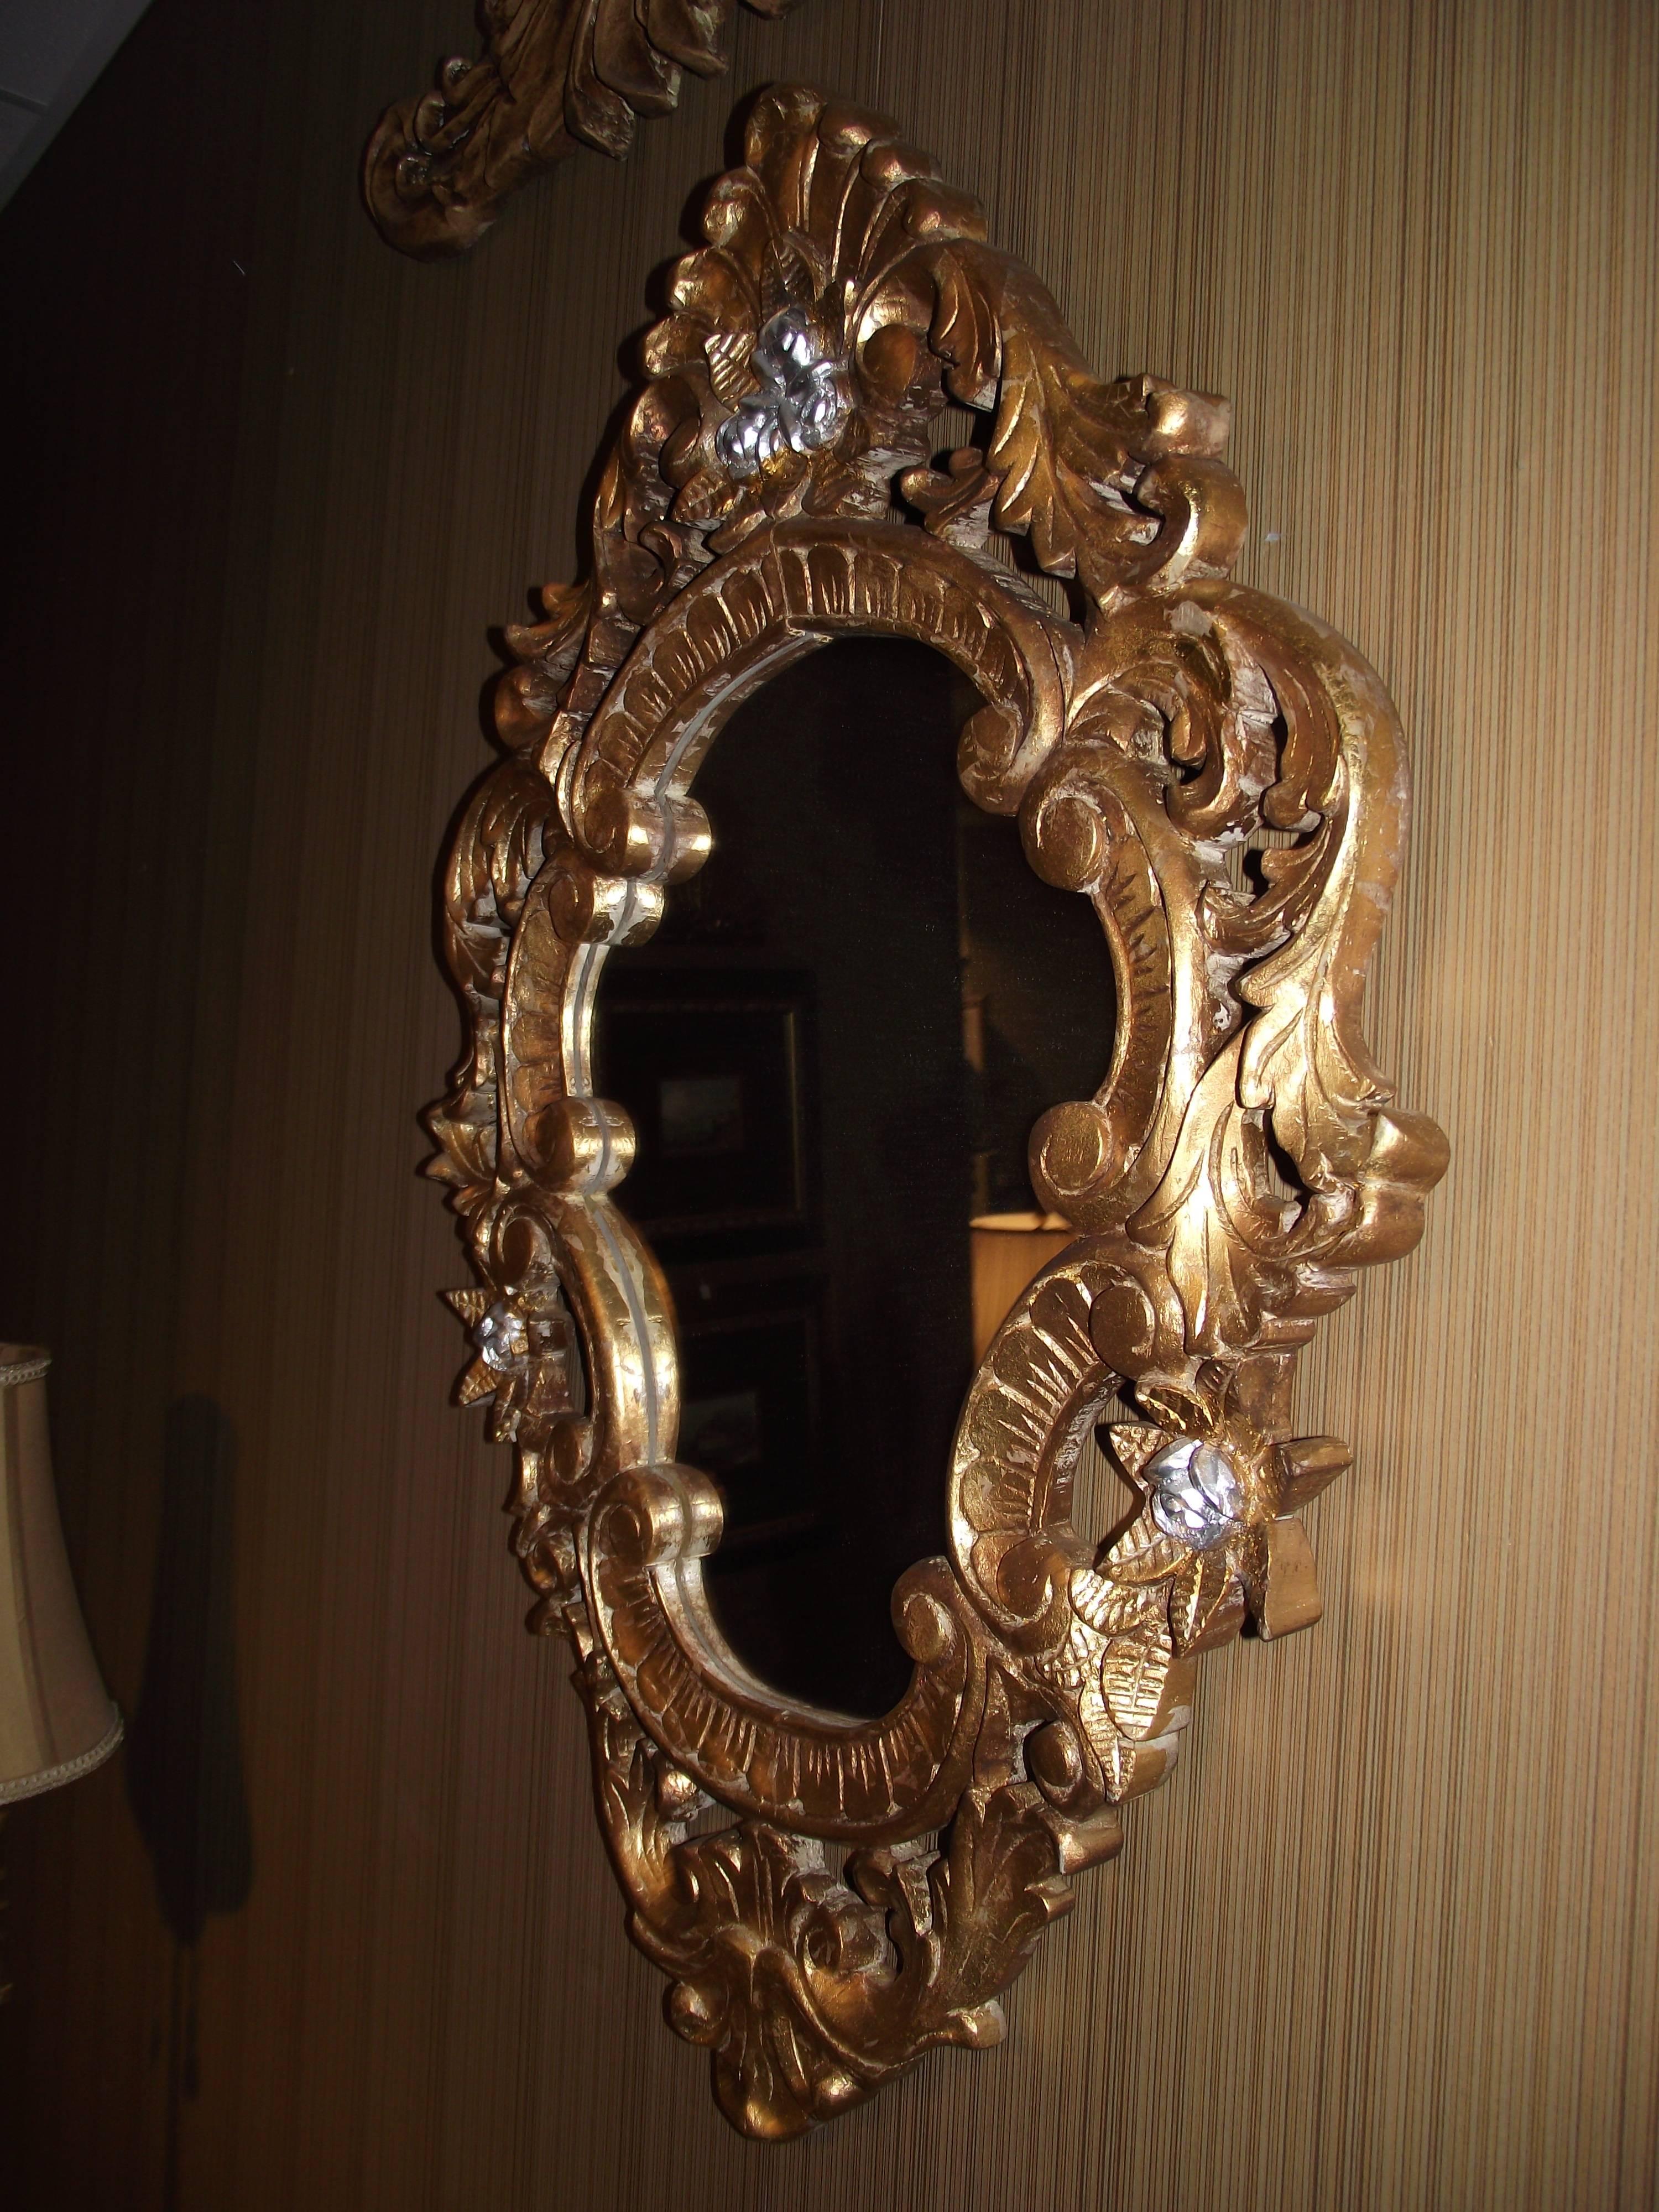 This beautiful mirror is hand-carved wood, gold leafed with silver accents.

As the pictures show it has intricate and rich detailing.